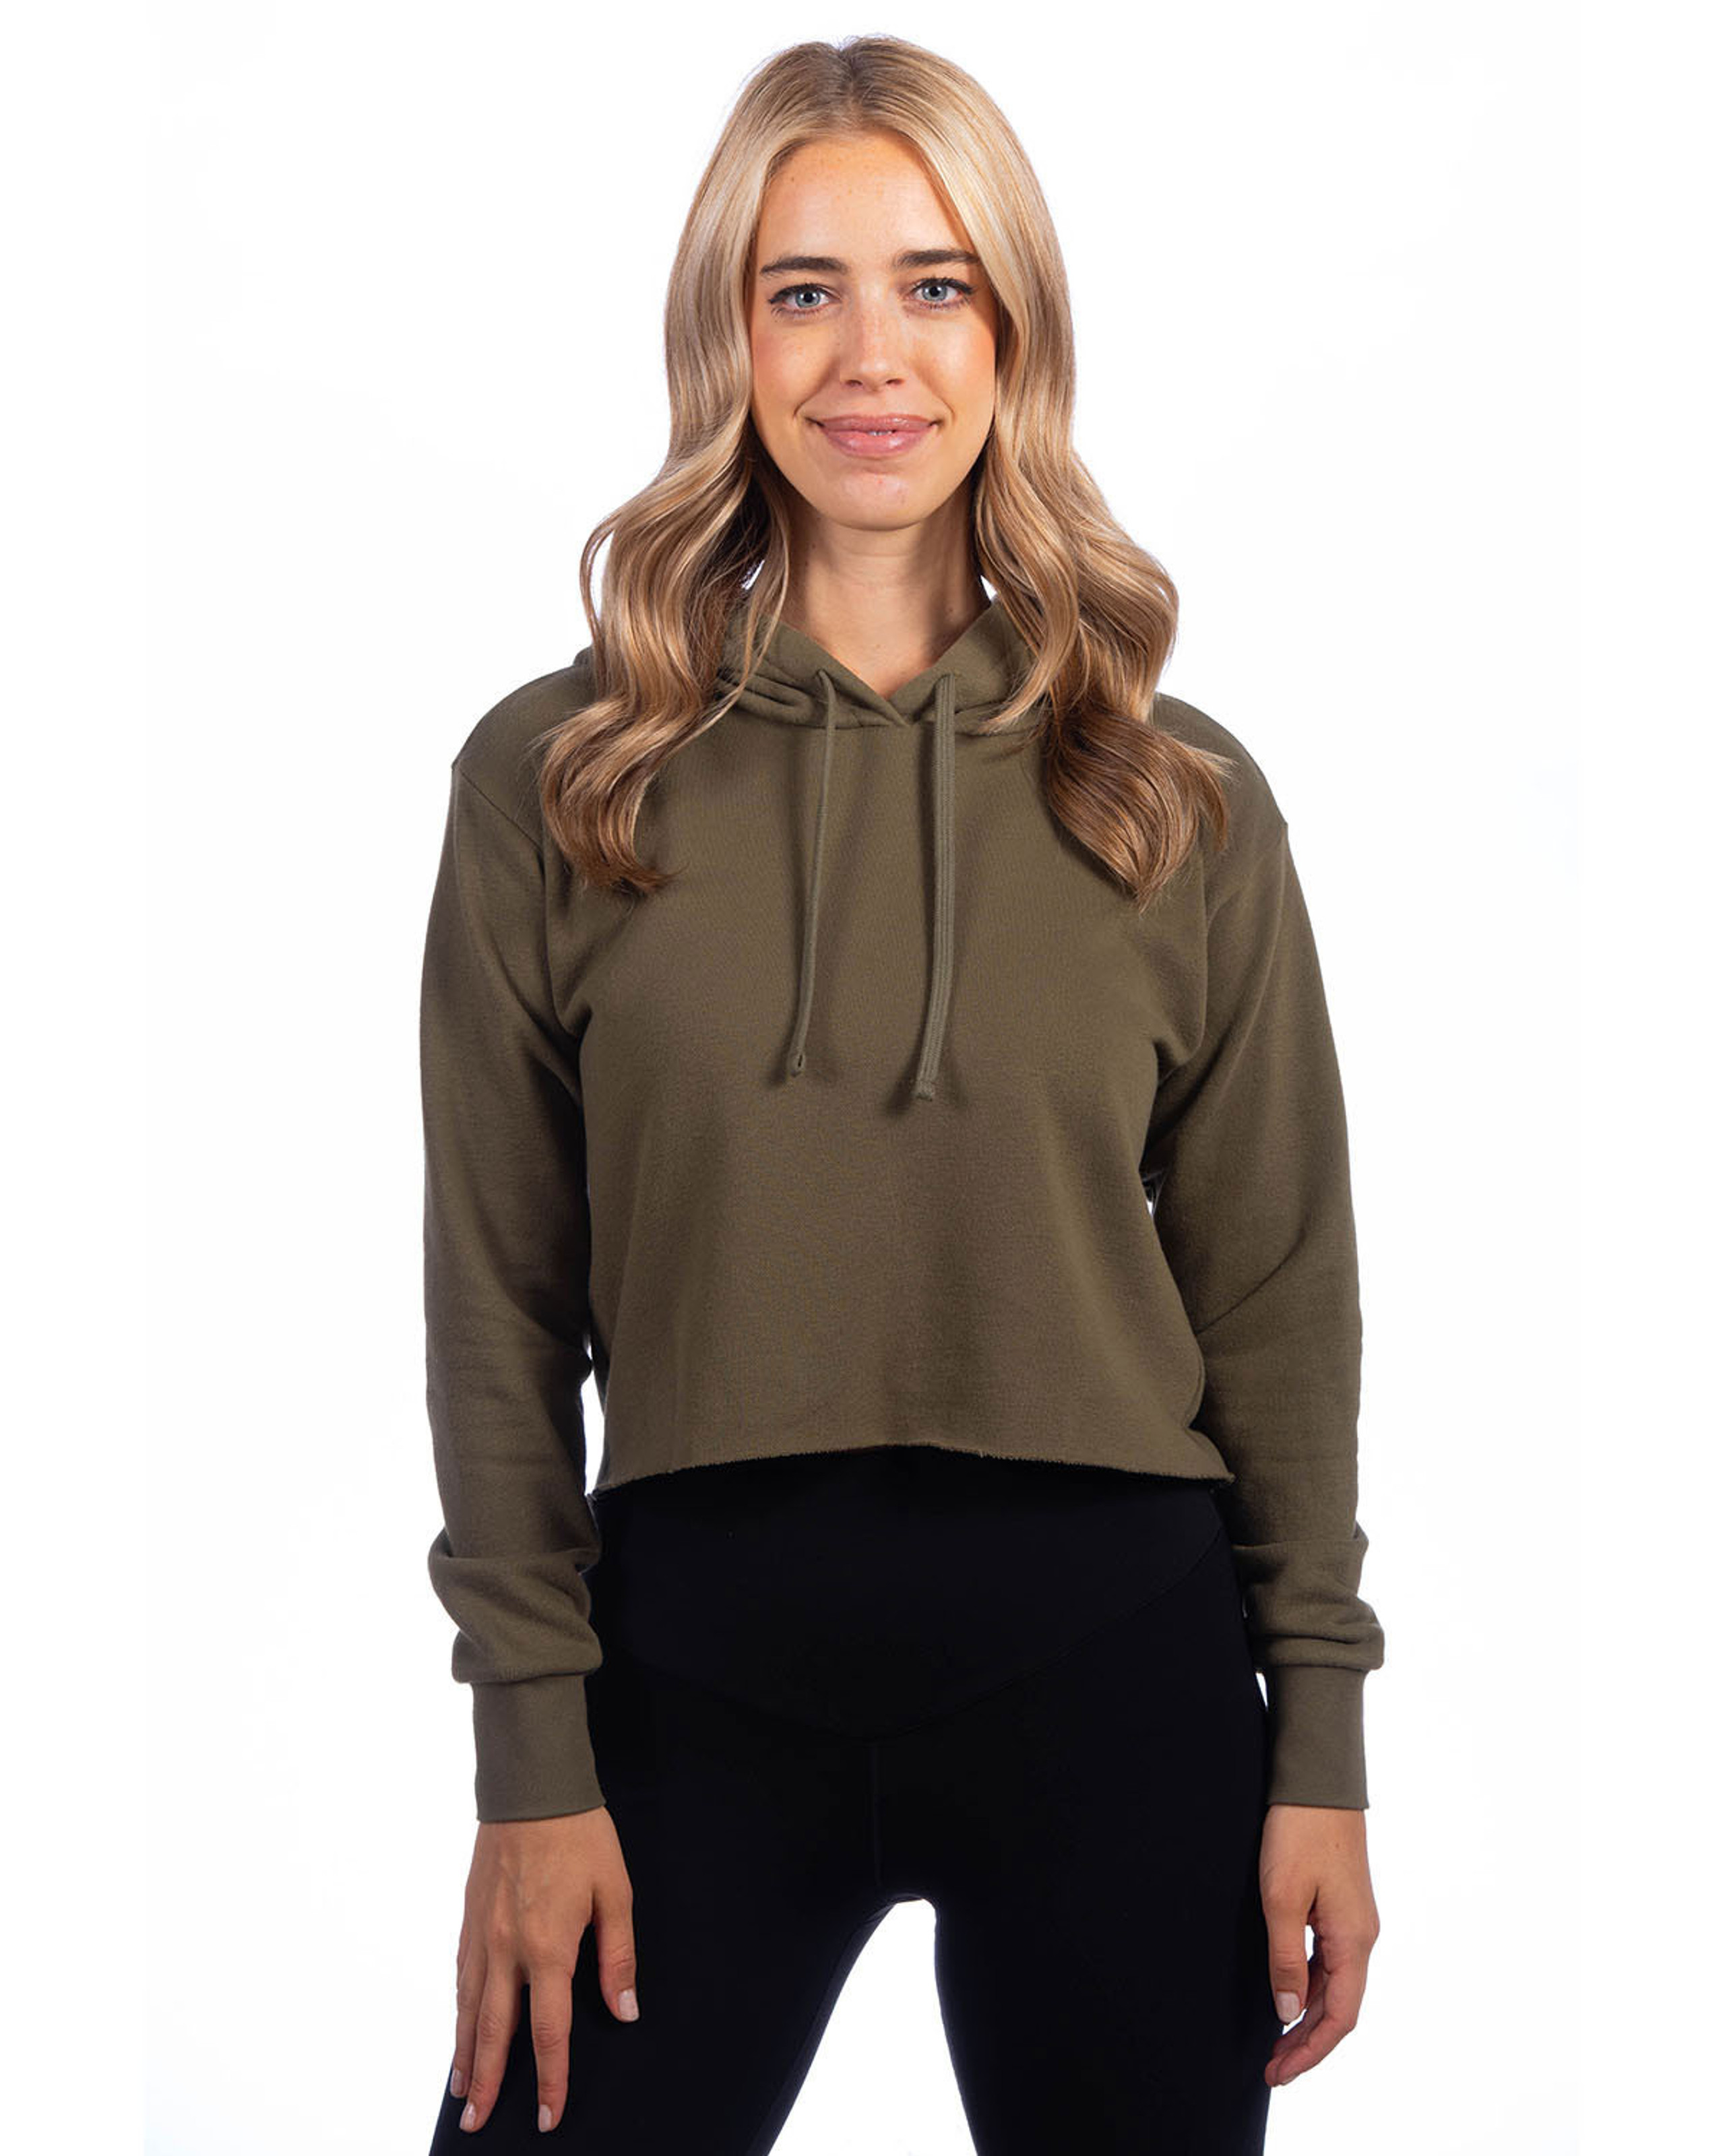 Next Level 9384 Ladies' Cropped Pullover Hooded Sweatshirt ...